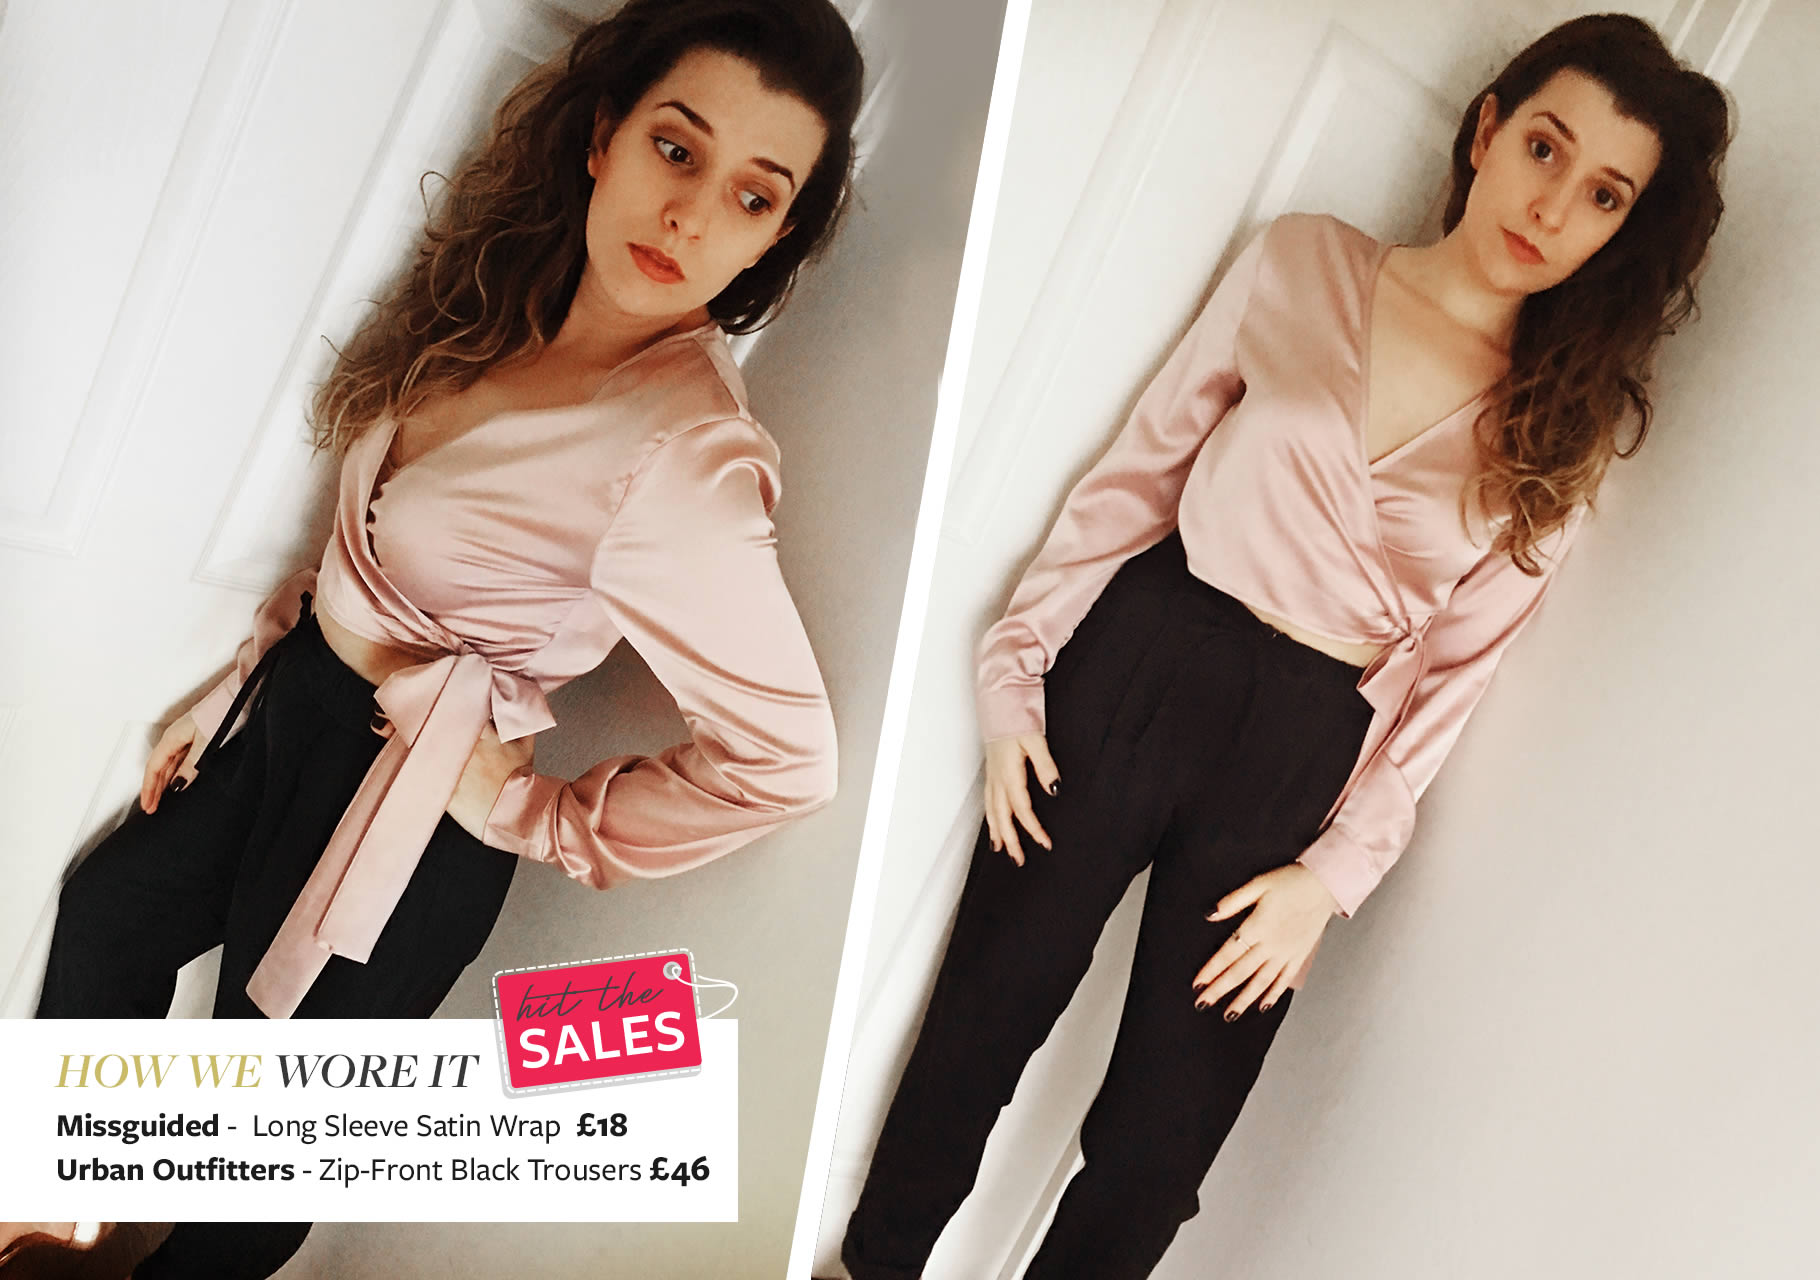 Emilie wears Missguided - Long Sleeve Satin Wrap Front Crop Pink with Urban Outfitters- Light Before Dark Zip-Front Black Trousers